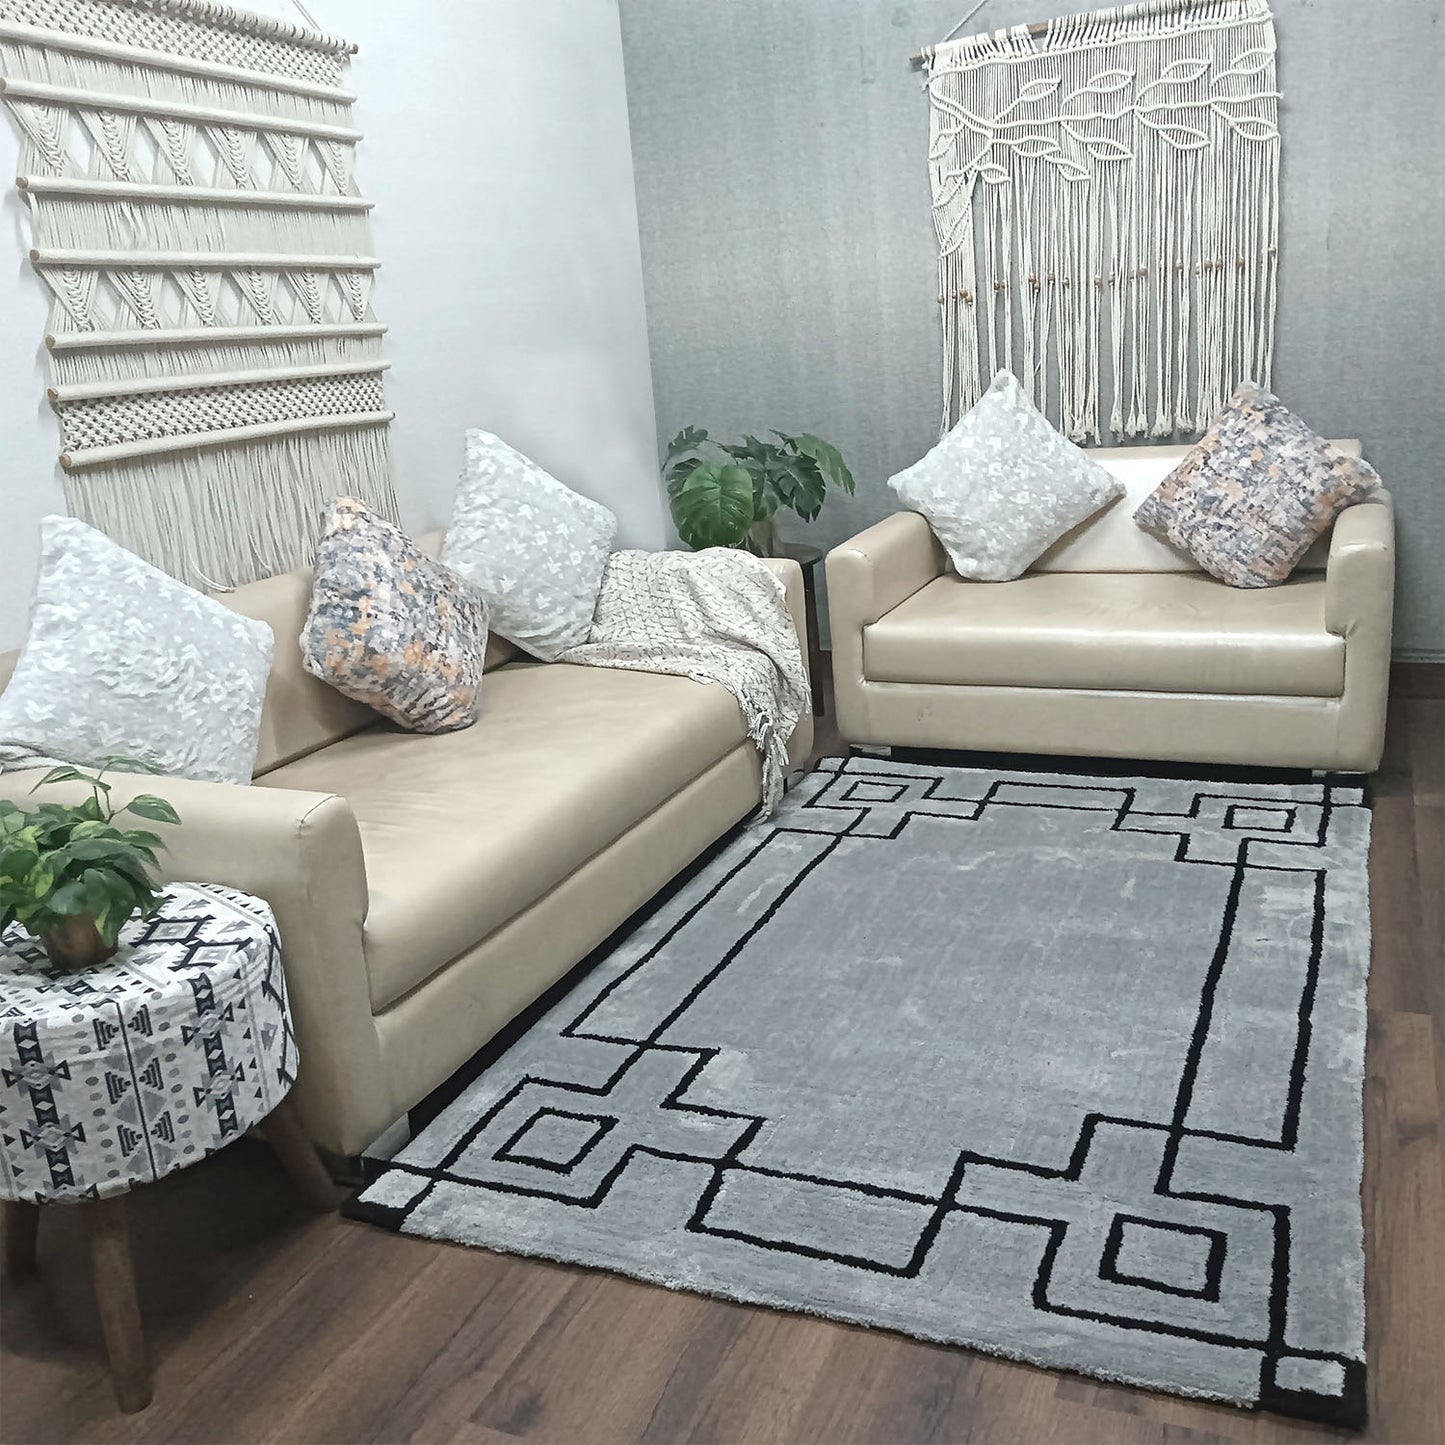 Avioni Luxury Collection- Plush Luxury Grey and Black Tone Carpet with 3d Traditional Design -Different Sizes Shaggy Fluffy Rugs and Carpet for Living Room